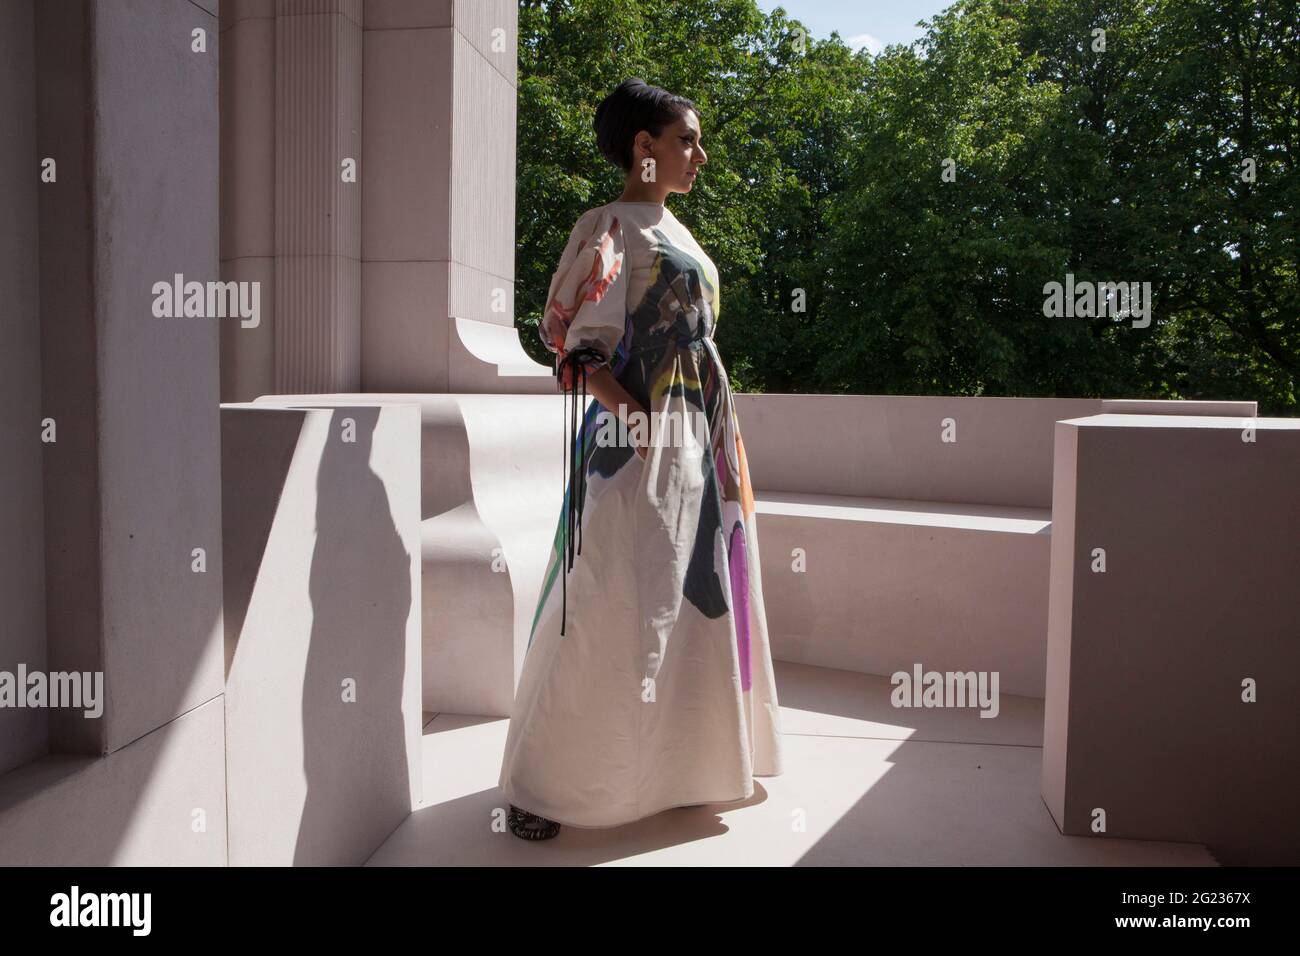 London, UK, 8 June 2021: The new Serpentine summer pavillion, designed by Sumayya Vally of South African architectural practice Counterspace opens on 11 June in Kensington Gardens. She is the youngest ever architect to take on the challenge of designing a temporary open pavillion next to the Serpentine Gallery. Rachel Royse/Alamy Live News Stock Photo